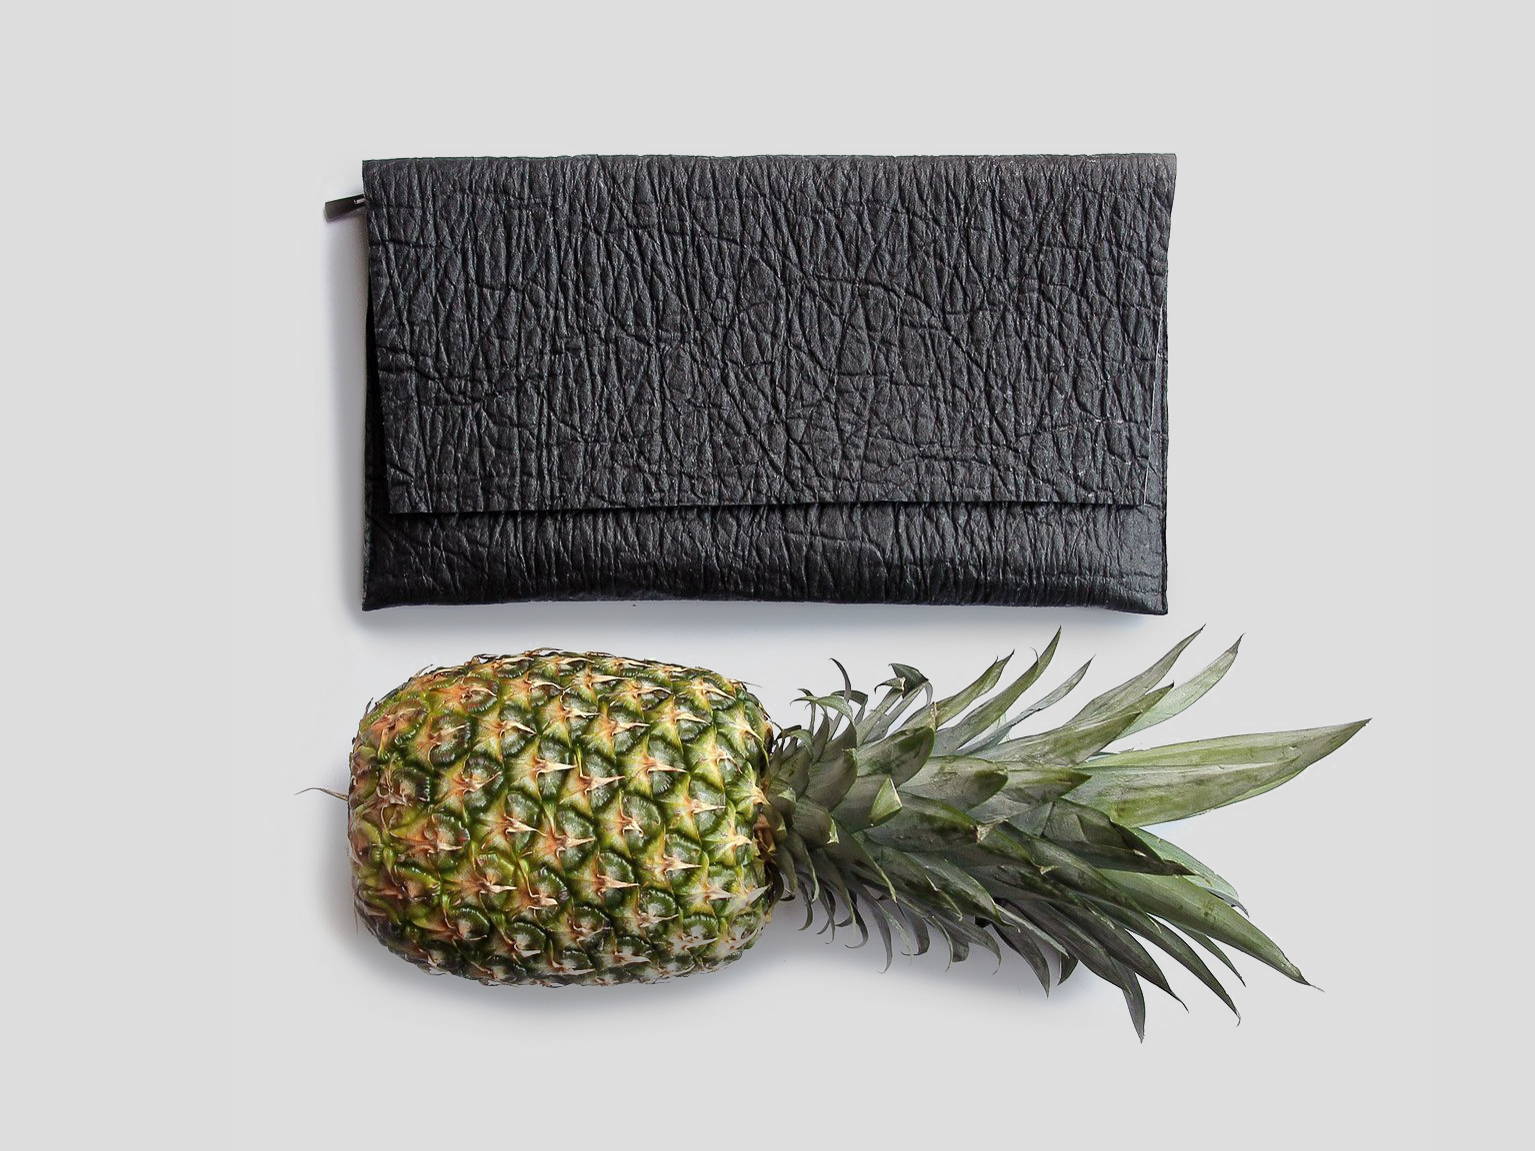 How to Make Vegan Leather?